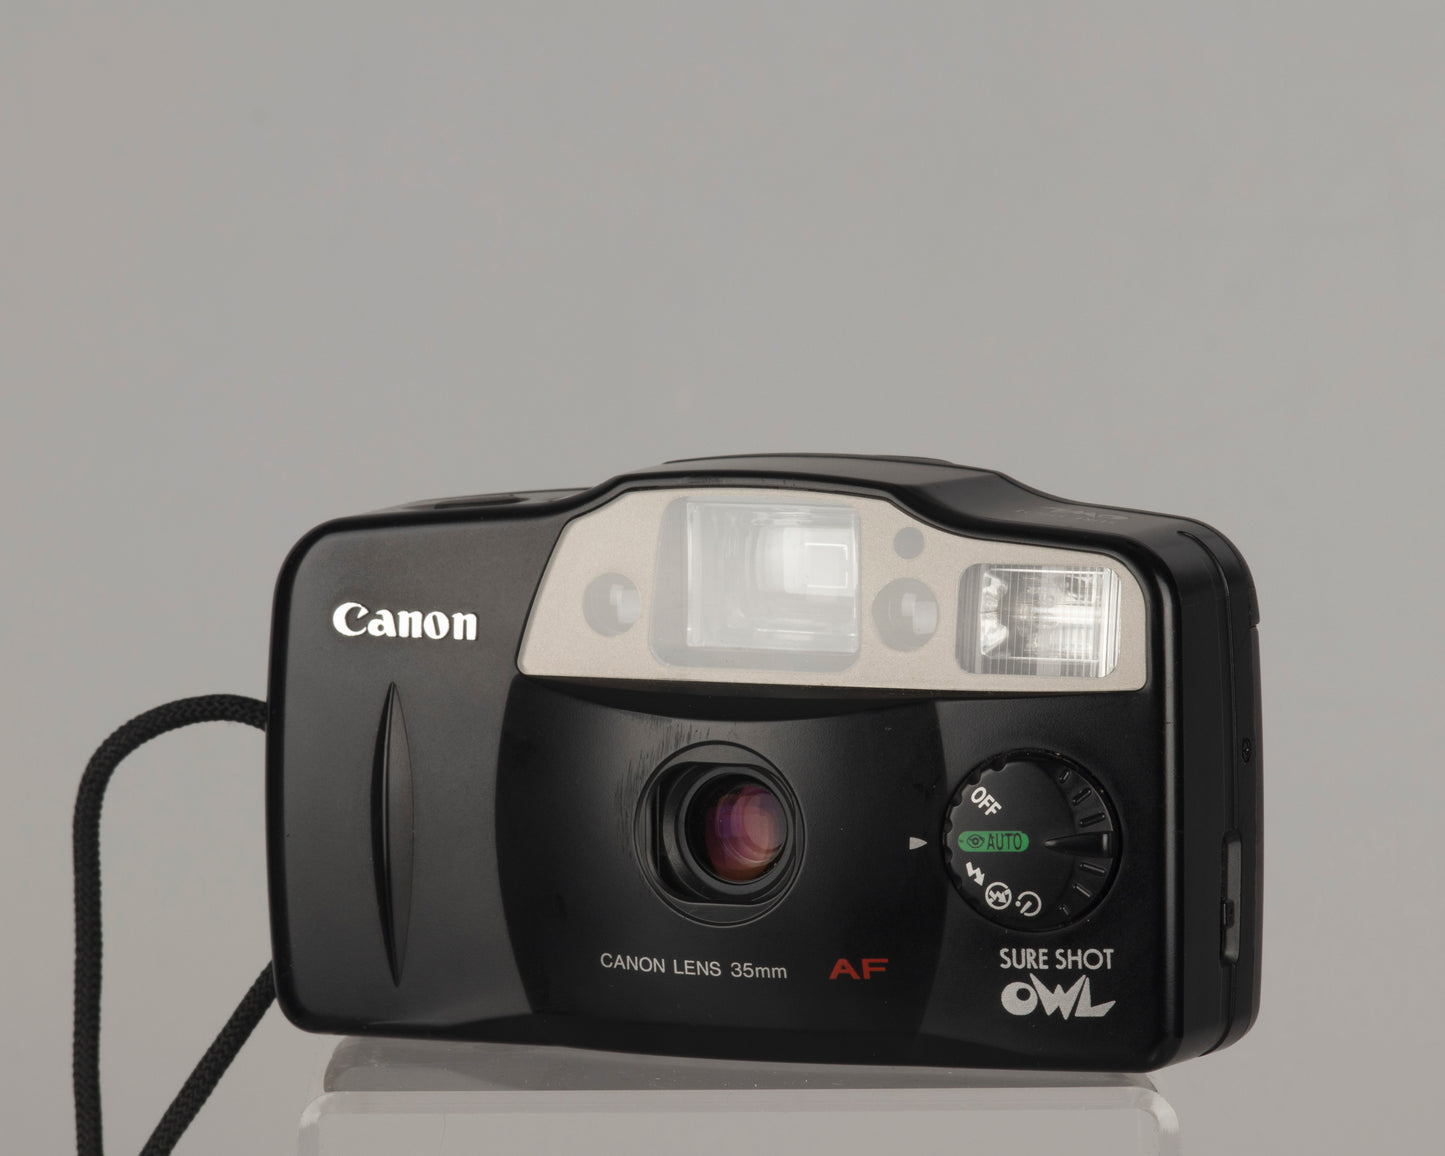 Canon Sure Shot Owl with case (serial 3204305)